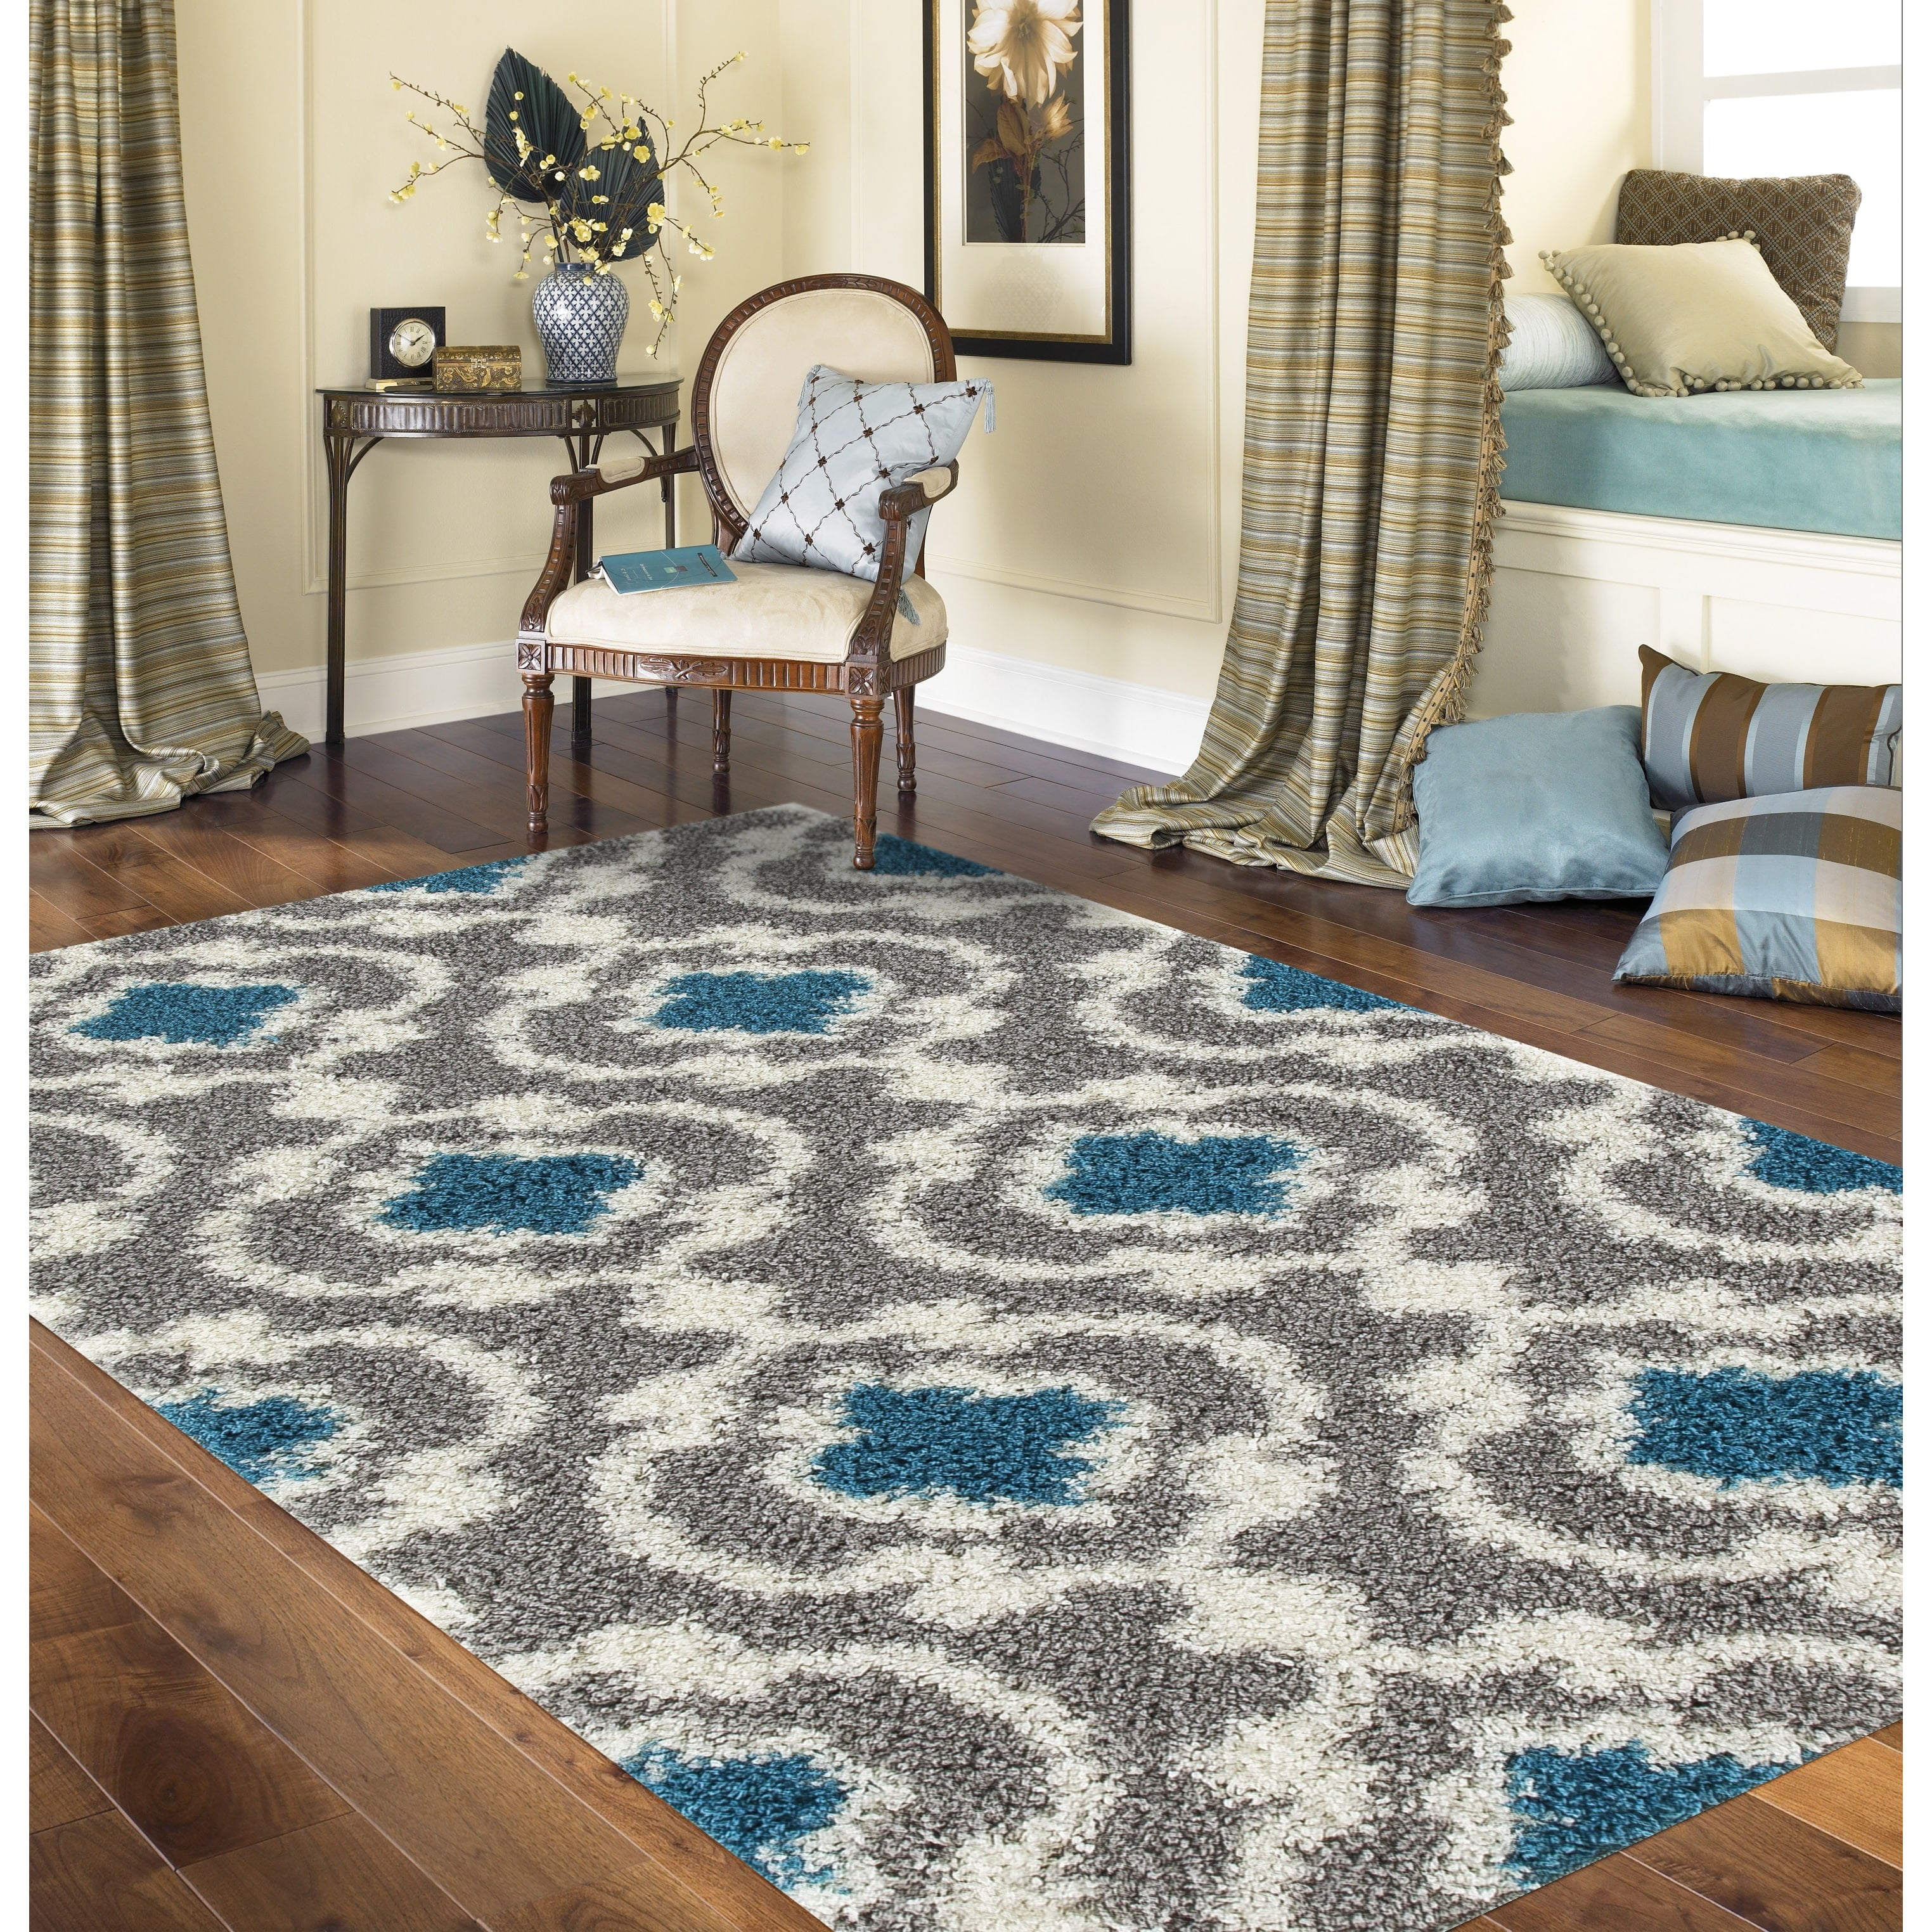 ALAZA Turquoise Moroccan Gold Line Area Rug Rugs for Living Room Bedroom 7' x 5' 